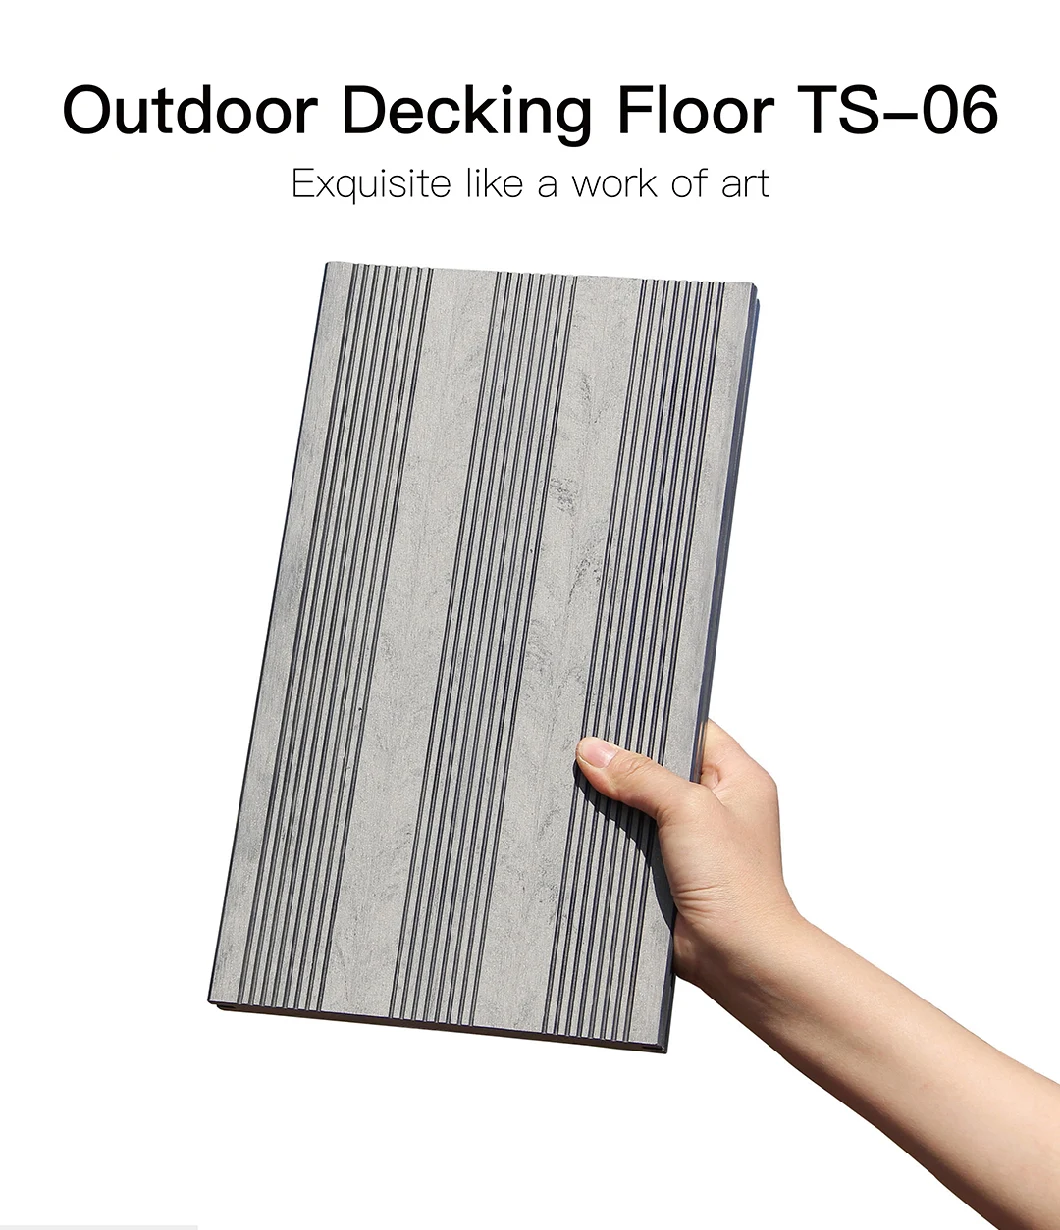 China Factory New Design Deep Embossing Solid WPC Decking